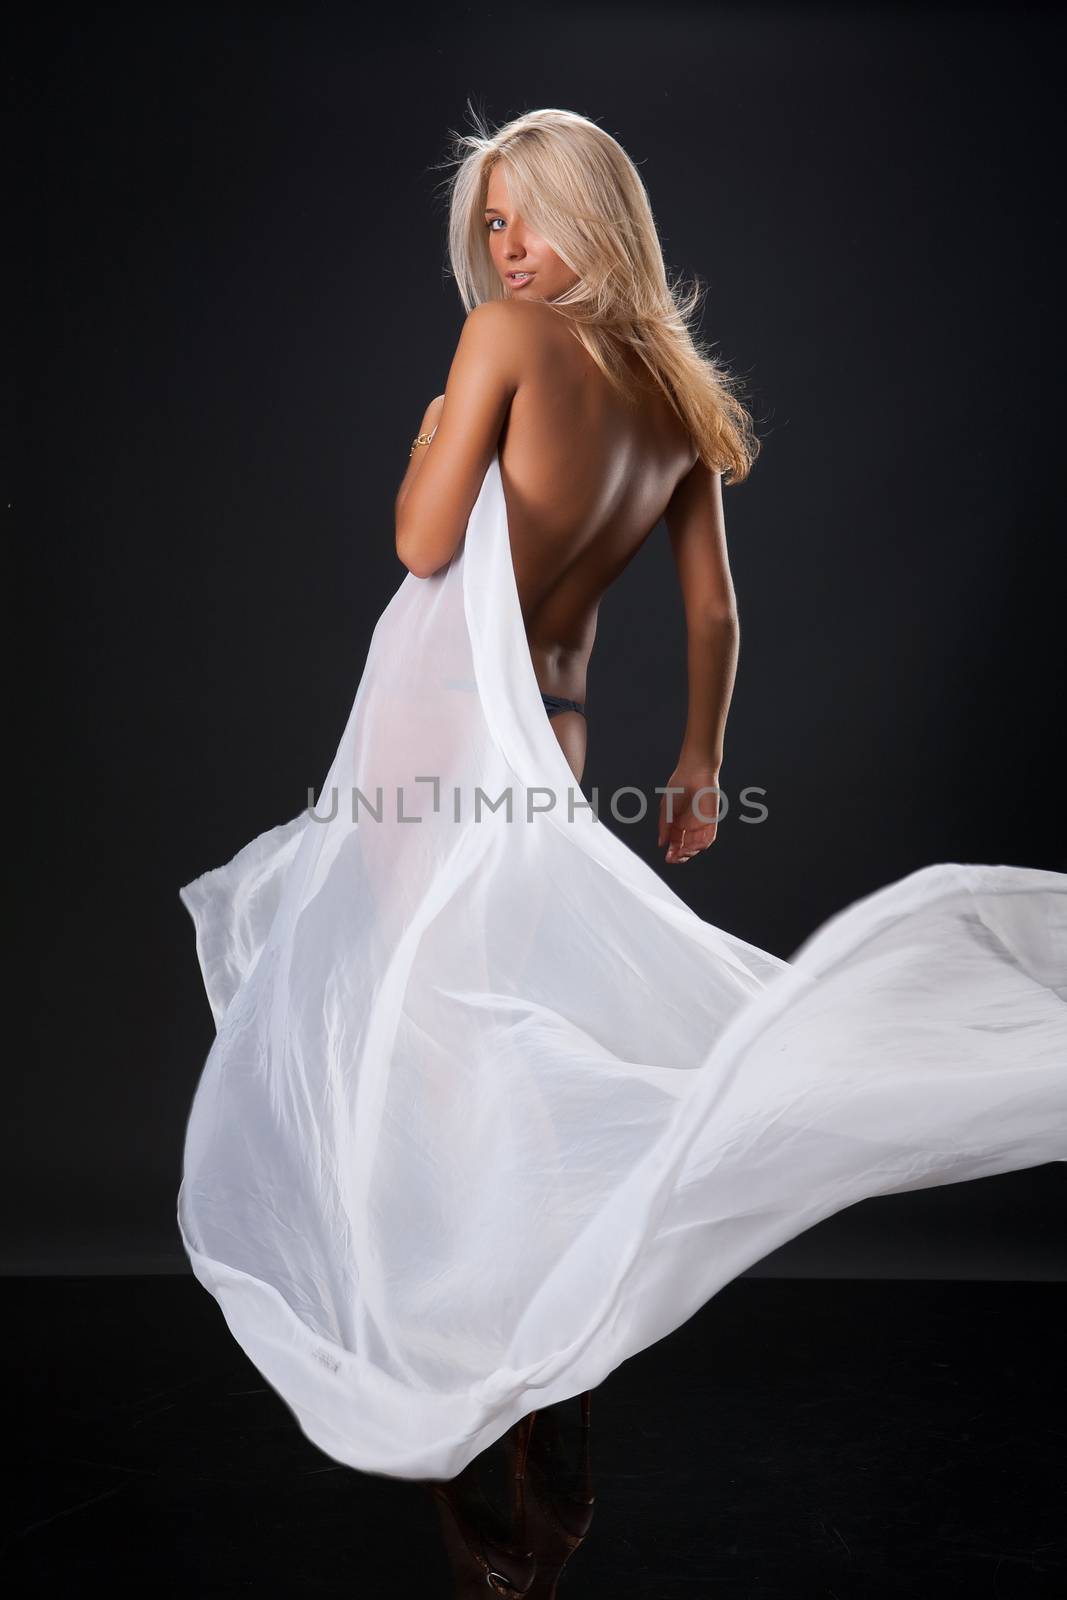 Young topless blonde woman with a waving white fabric on black reflecting background